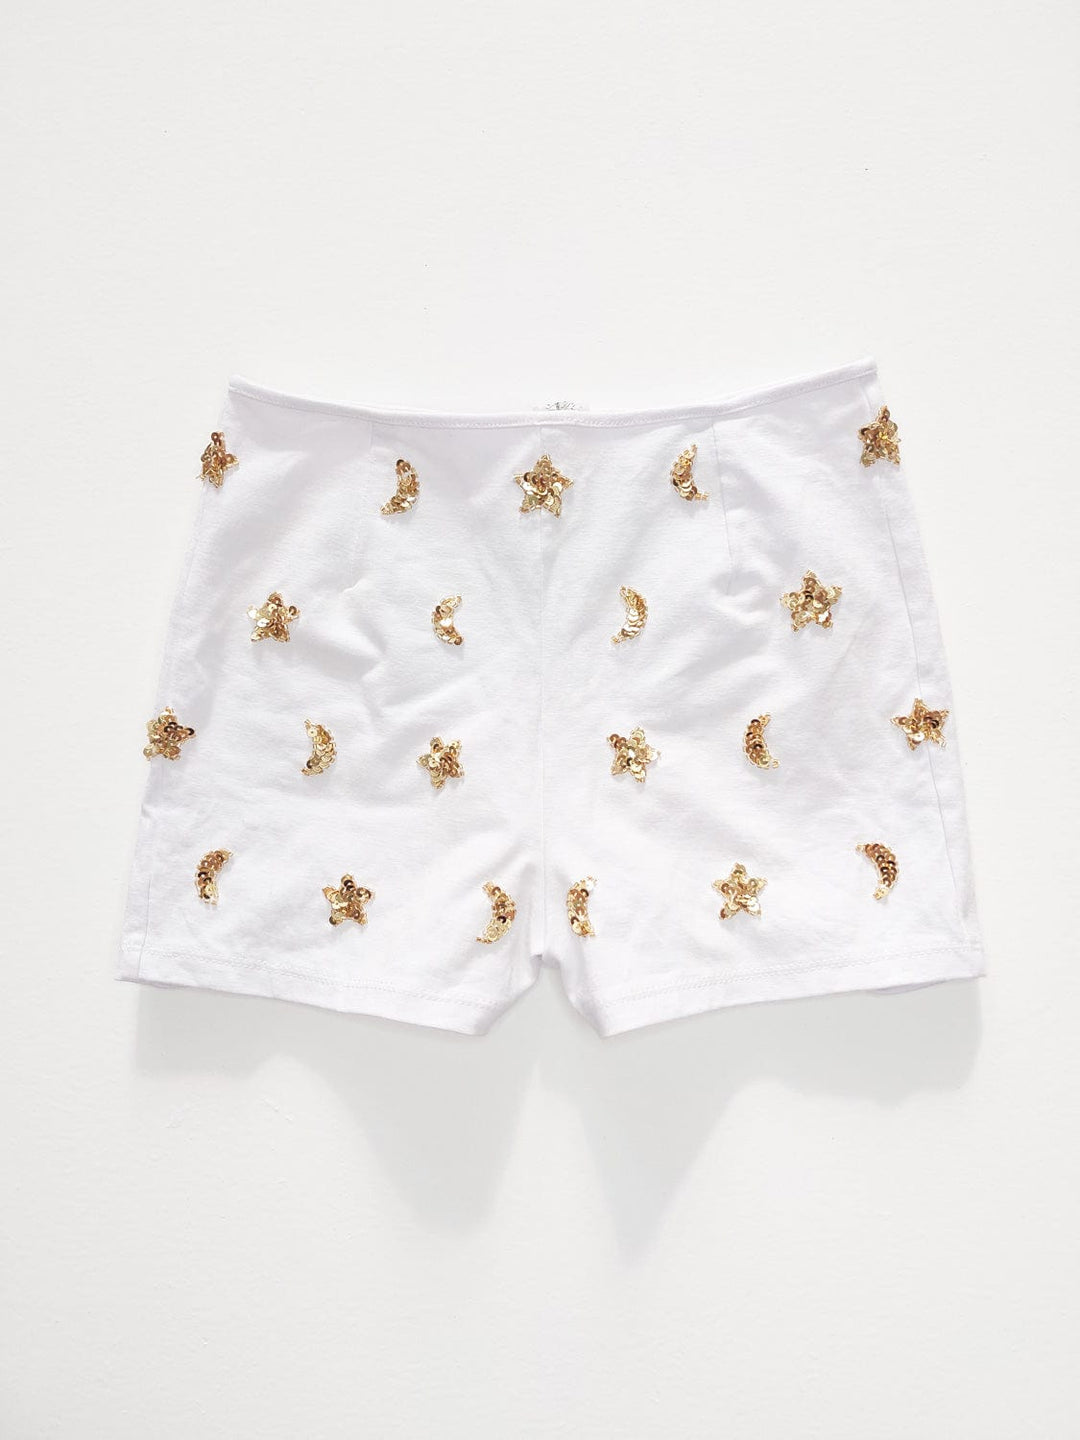 PRE-SALE / NEVADA HOT PANTS SHORTS - Her Pony